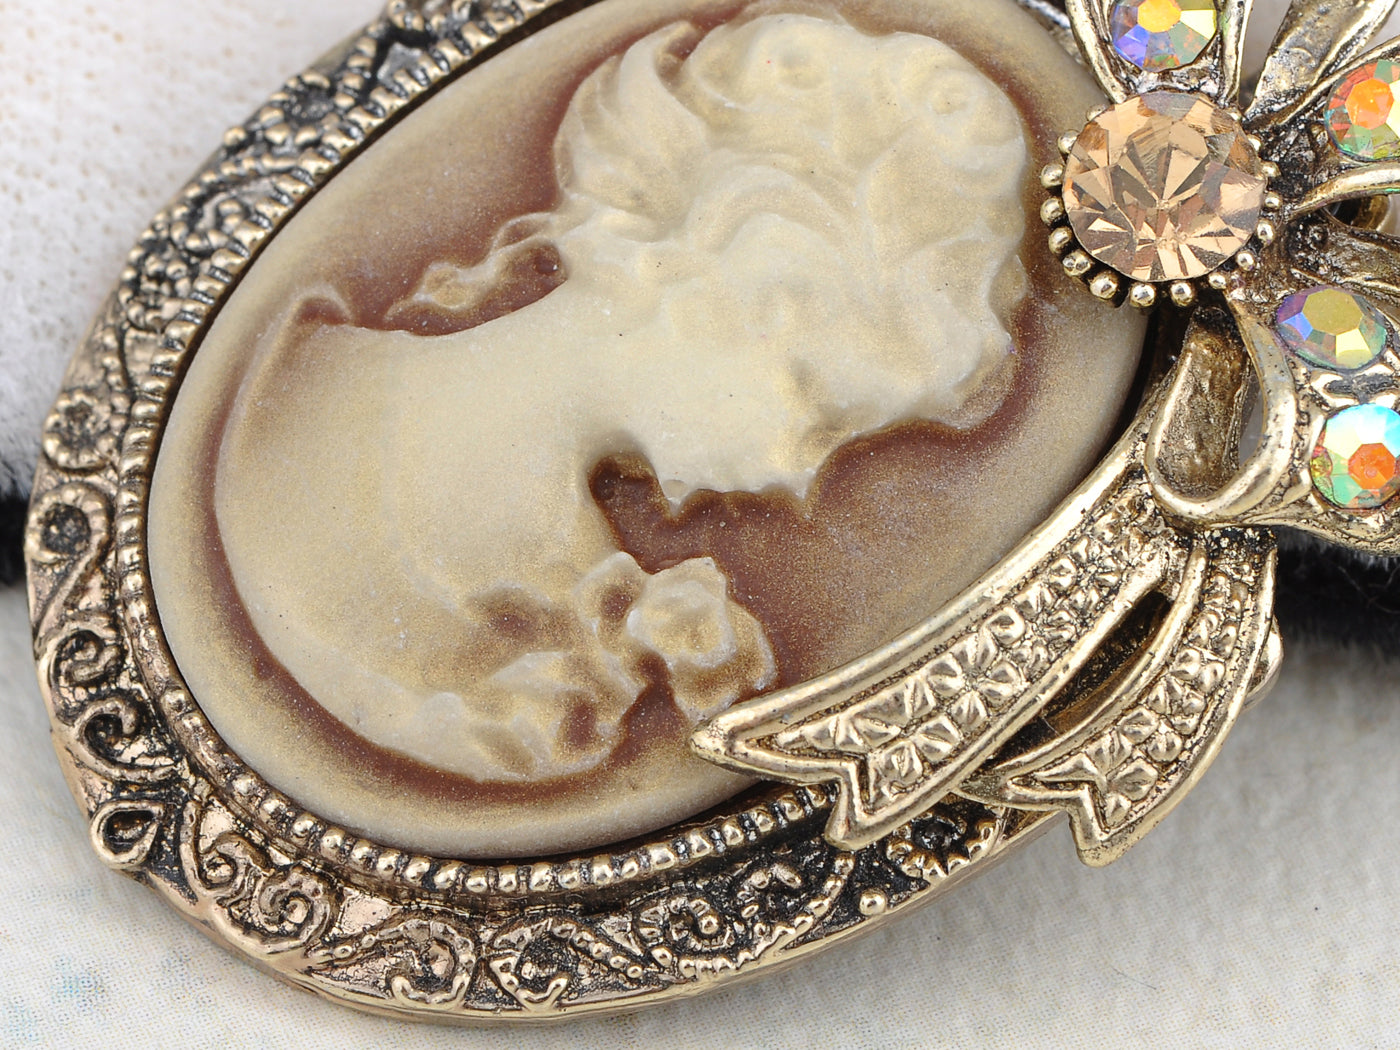 Vintage Victorian Lady Cameo Brooch Pin Maiden Flower Ribbon Bow Pendant